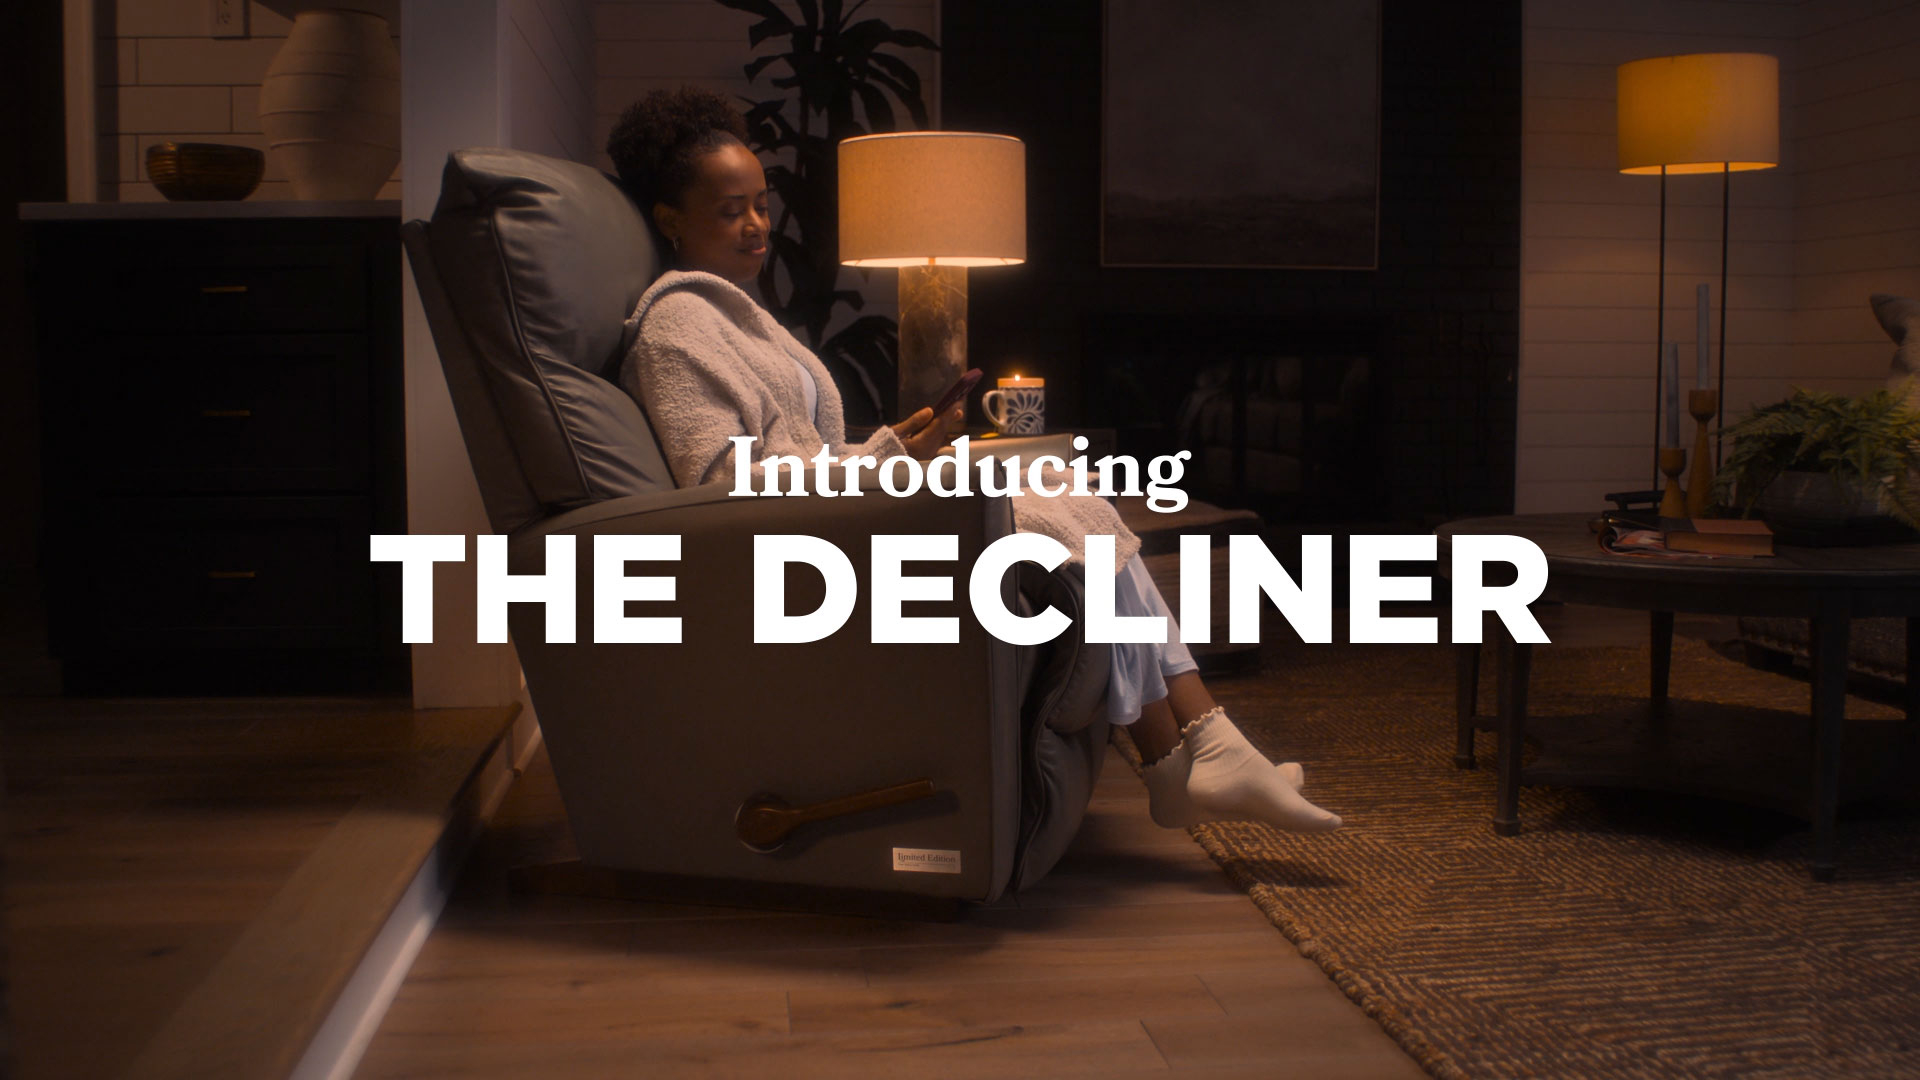 Experiencing the joy of missing out has never been easier thanks to The Decliner, an A.I.-powered recliner prototype from La-Z-Boy that allows the owner to generate a cancellation excuse via SMS text simply by pulling its handle. Three Decliners are available exclusively through an online contest.